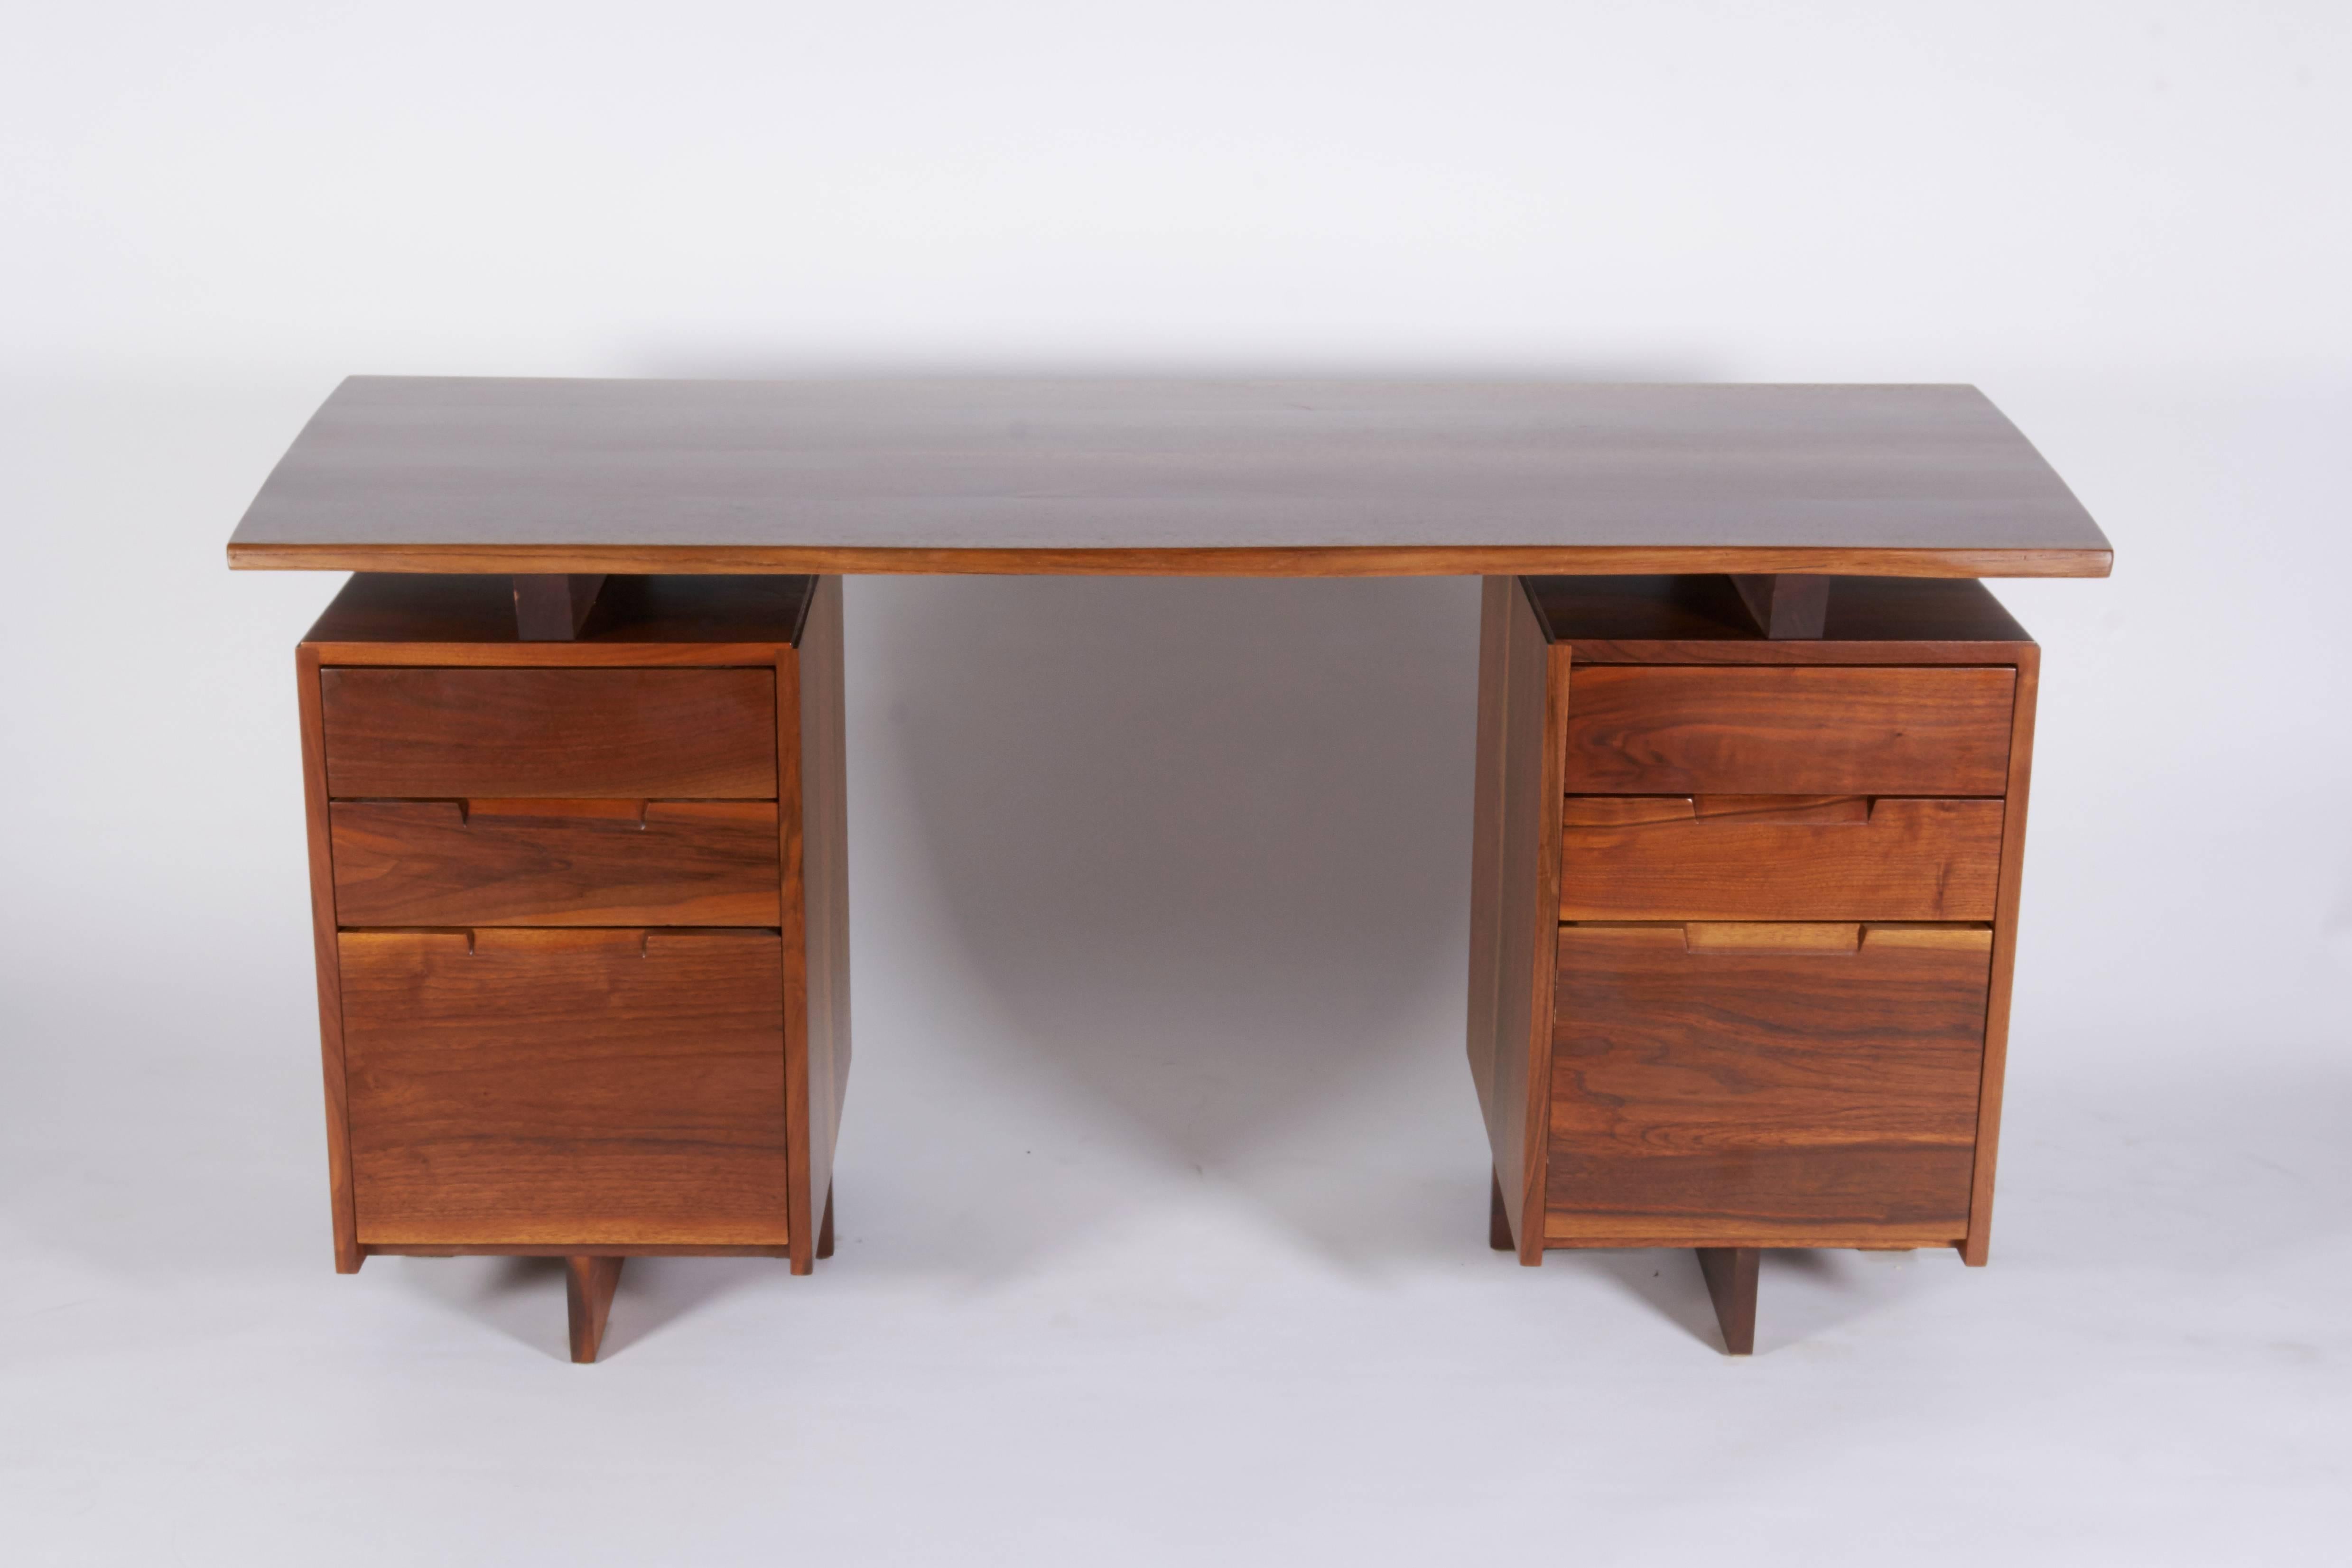 A Classic Nakashima desk both beautiful and functional with ample storage.